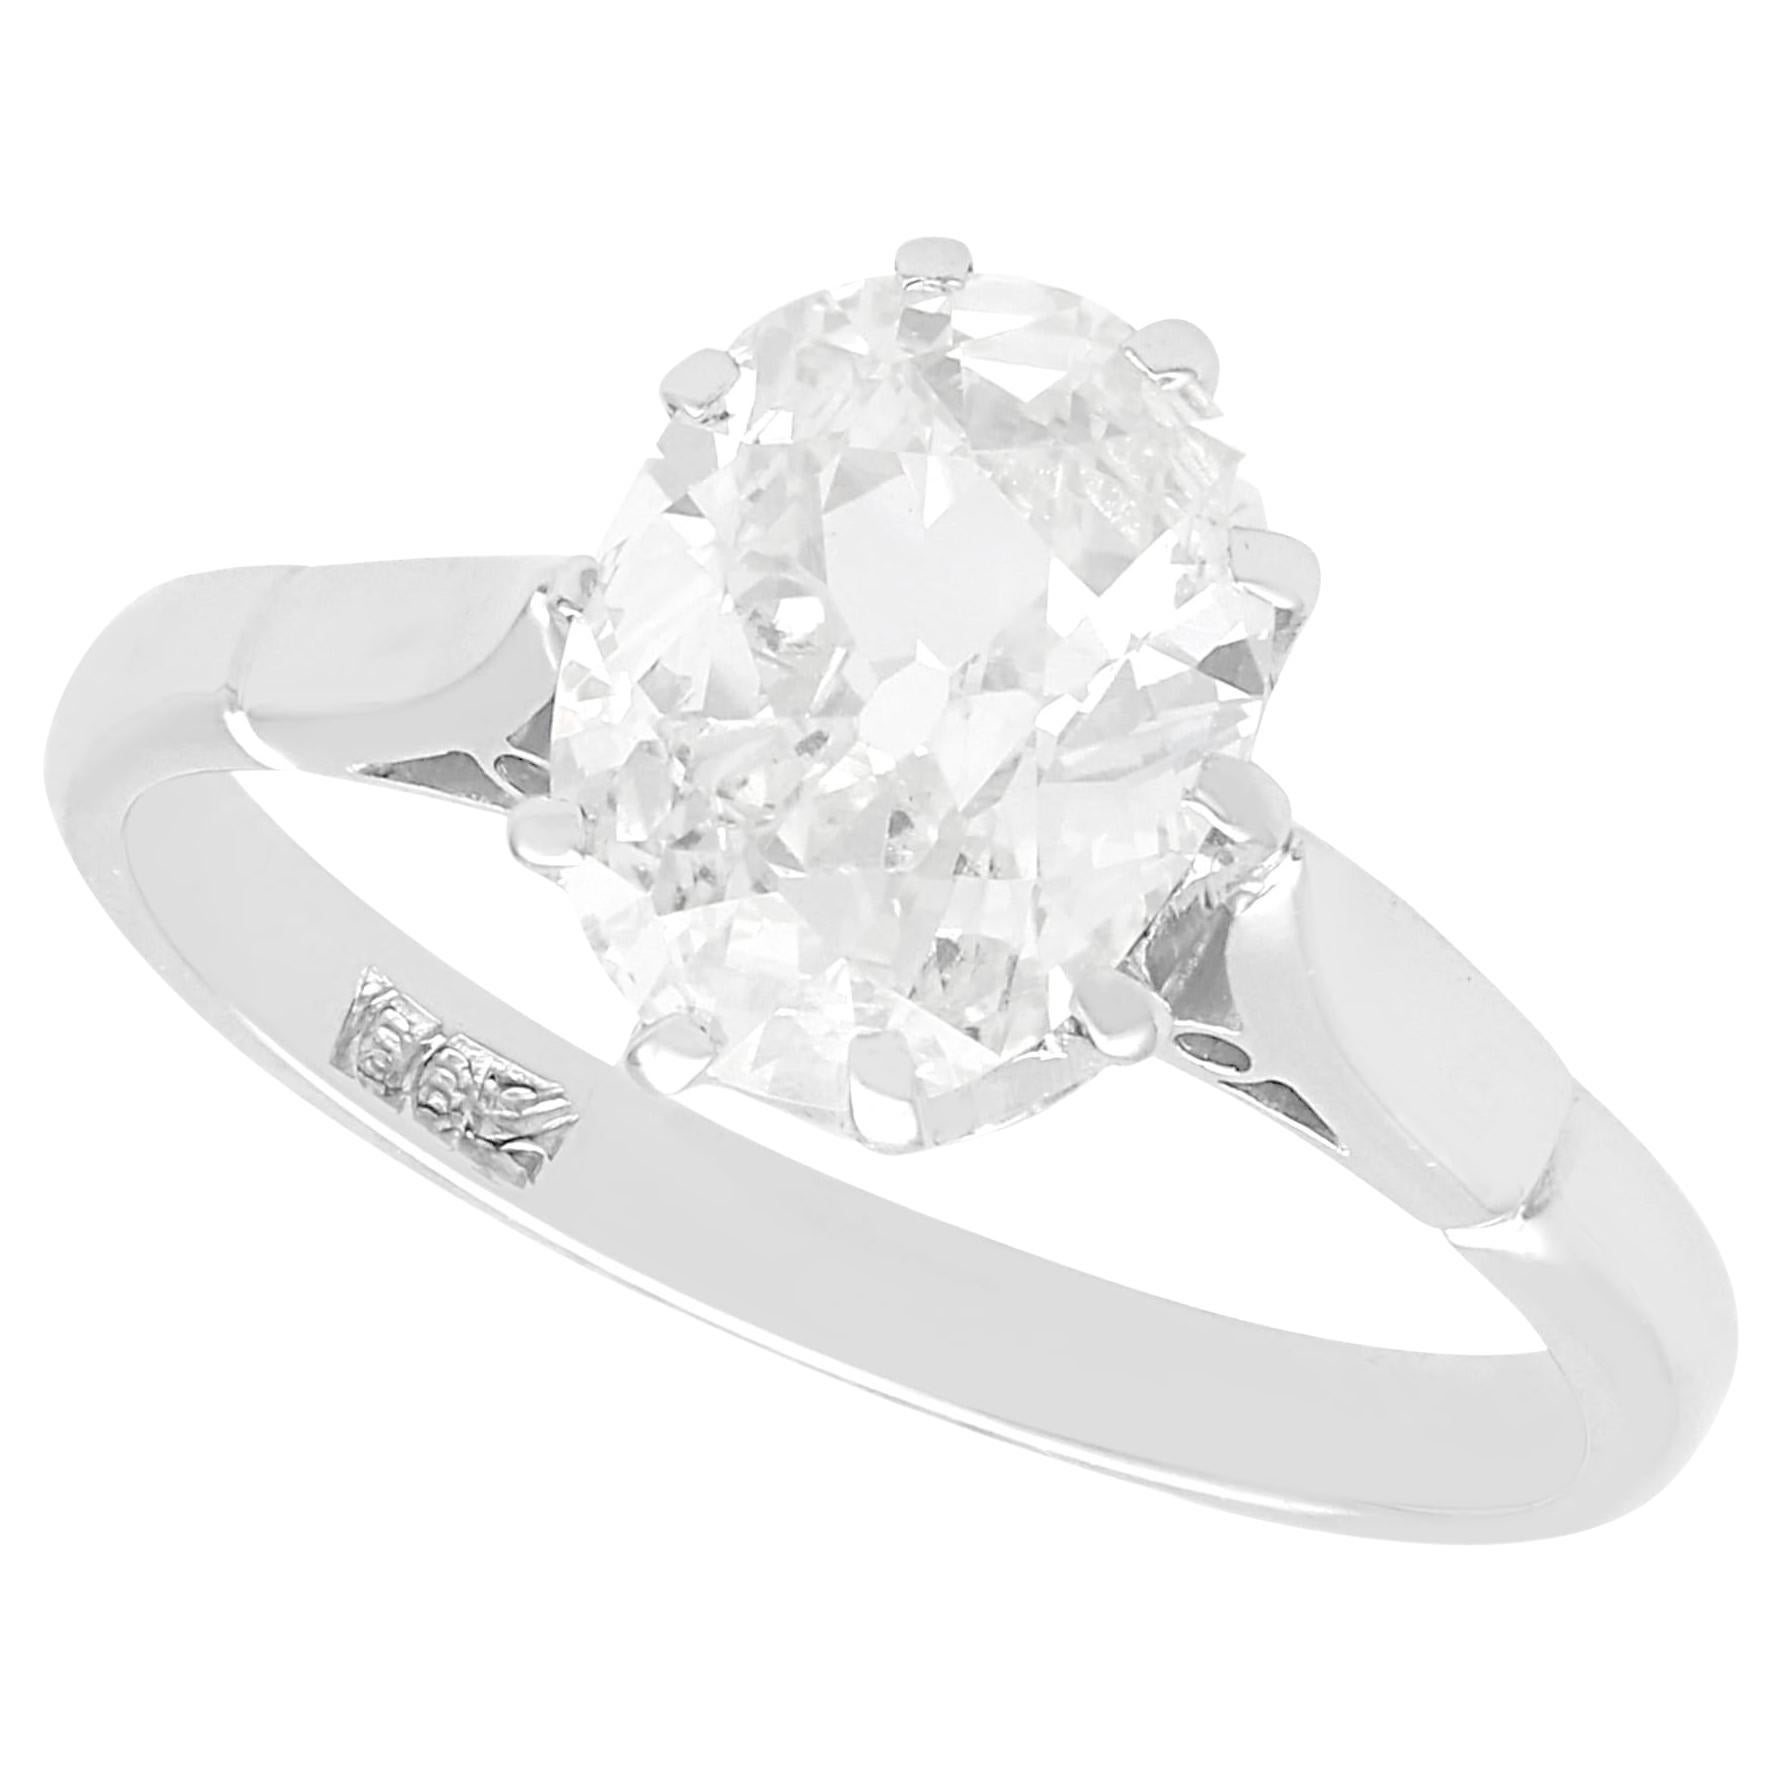 Antique 1.42 Carat Diamond and 18k White Gold Solitaire Ring  For Sale